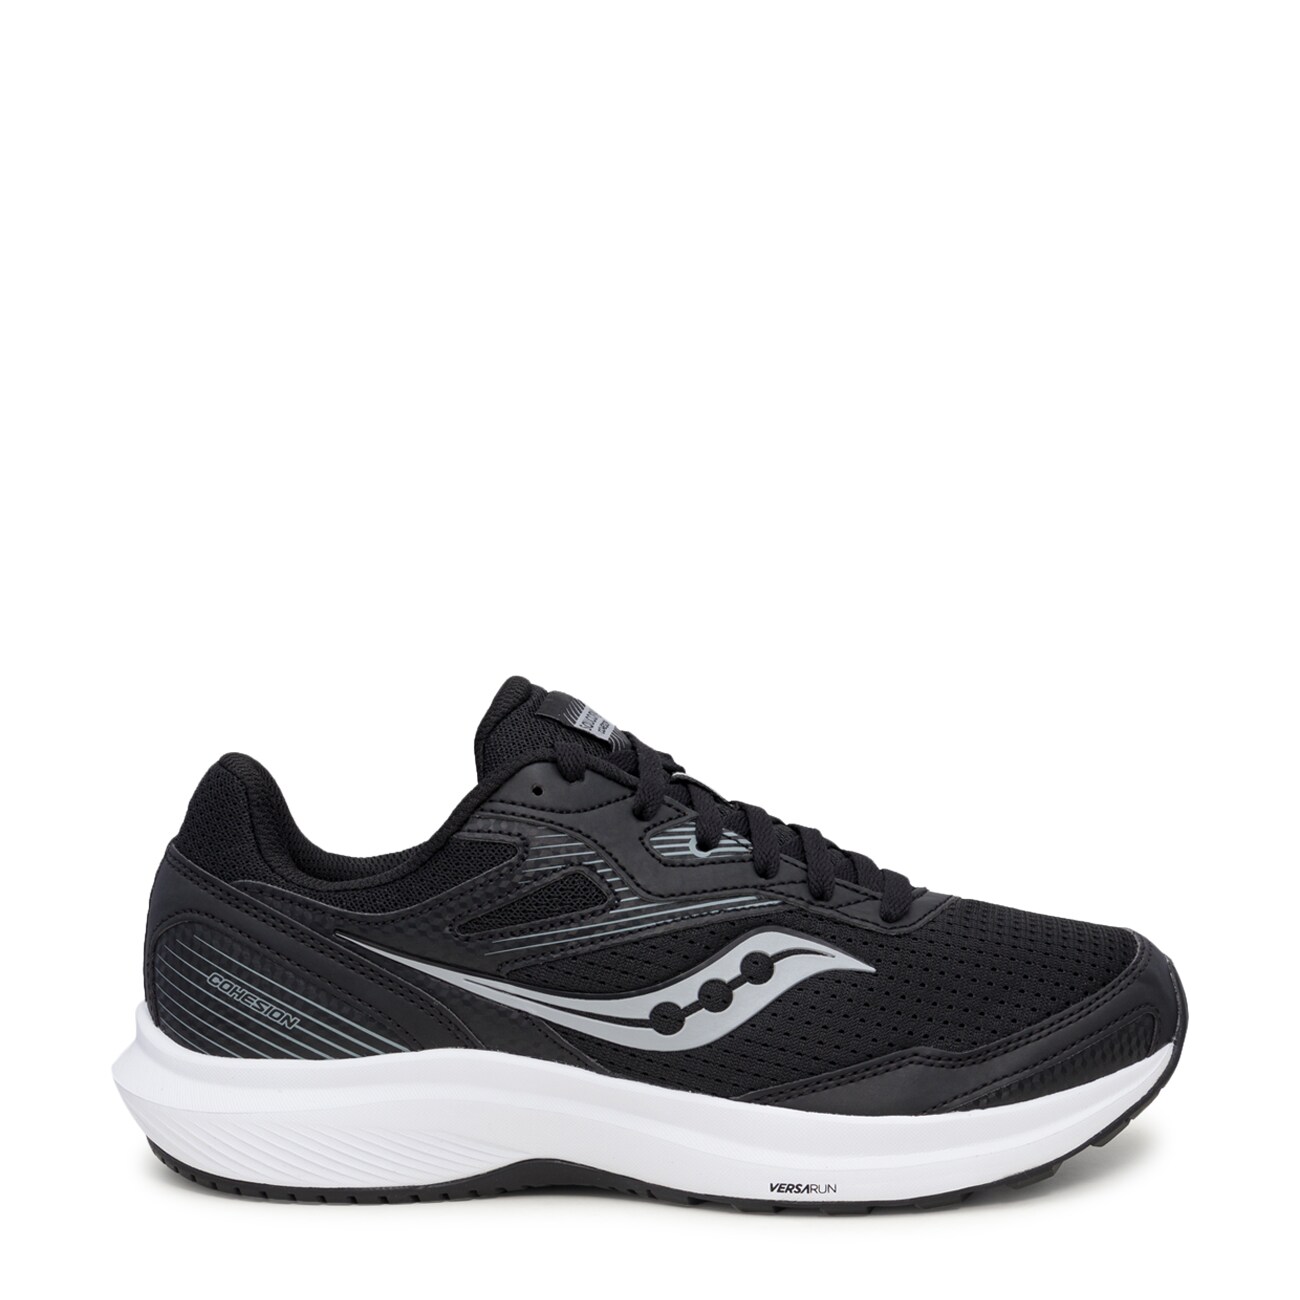 Saucony Men's Cohesion 16 Wide Width Running Shoe | The Shoe Company